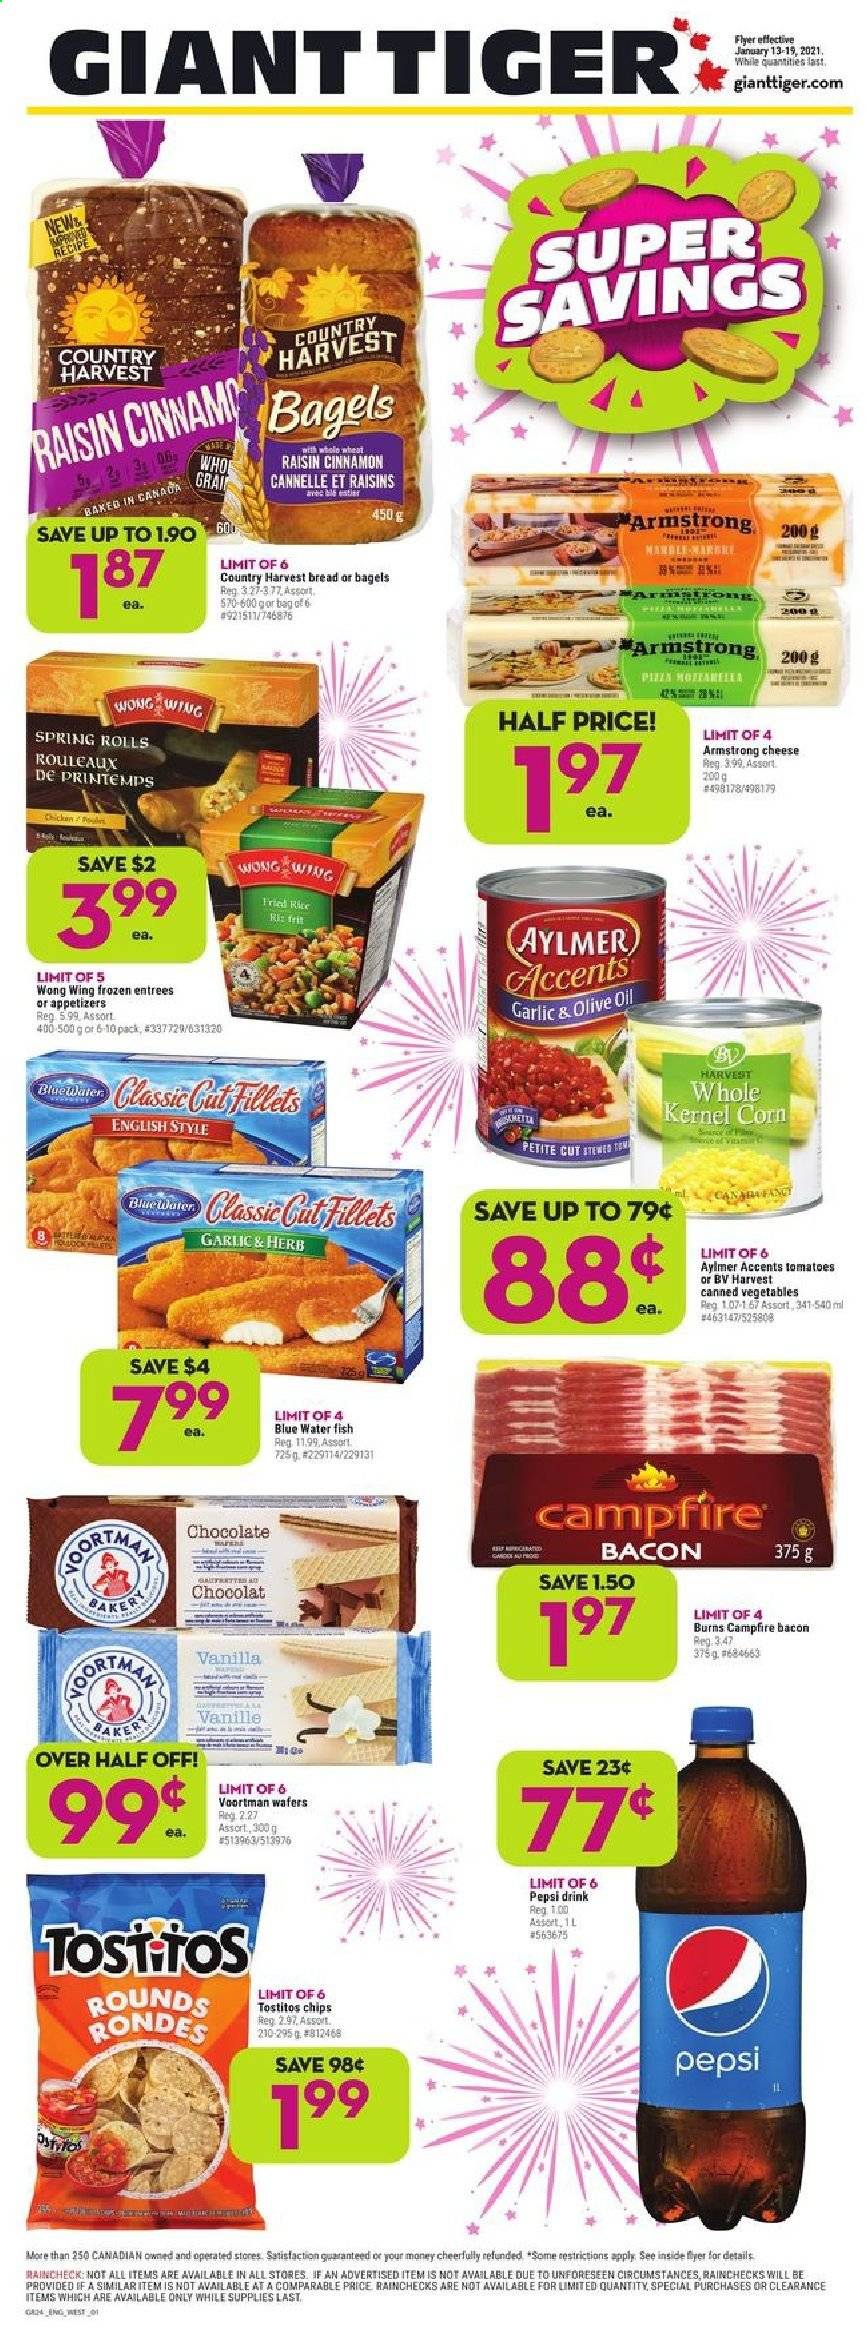 thumbnail - Giant Tiger Flyer - January 13, 2021 - January 19, 2021 - Sales products - bagels, bread, corn, tomatoes, fish, spring rolls, bacon, cheese, Country Harvest, wafers, chocolate, Tostitos, canned vegetables, cinnamon, olive oil, oil, dried fruit, Pepsi, Campfire, vitamin c, raisins. Page 1.